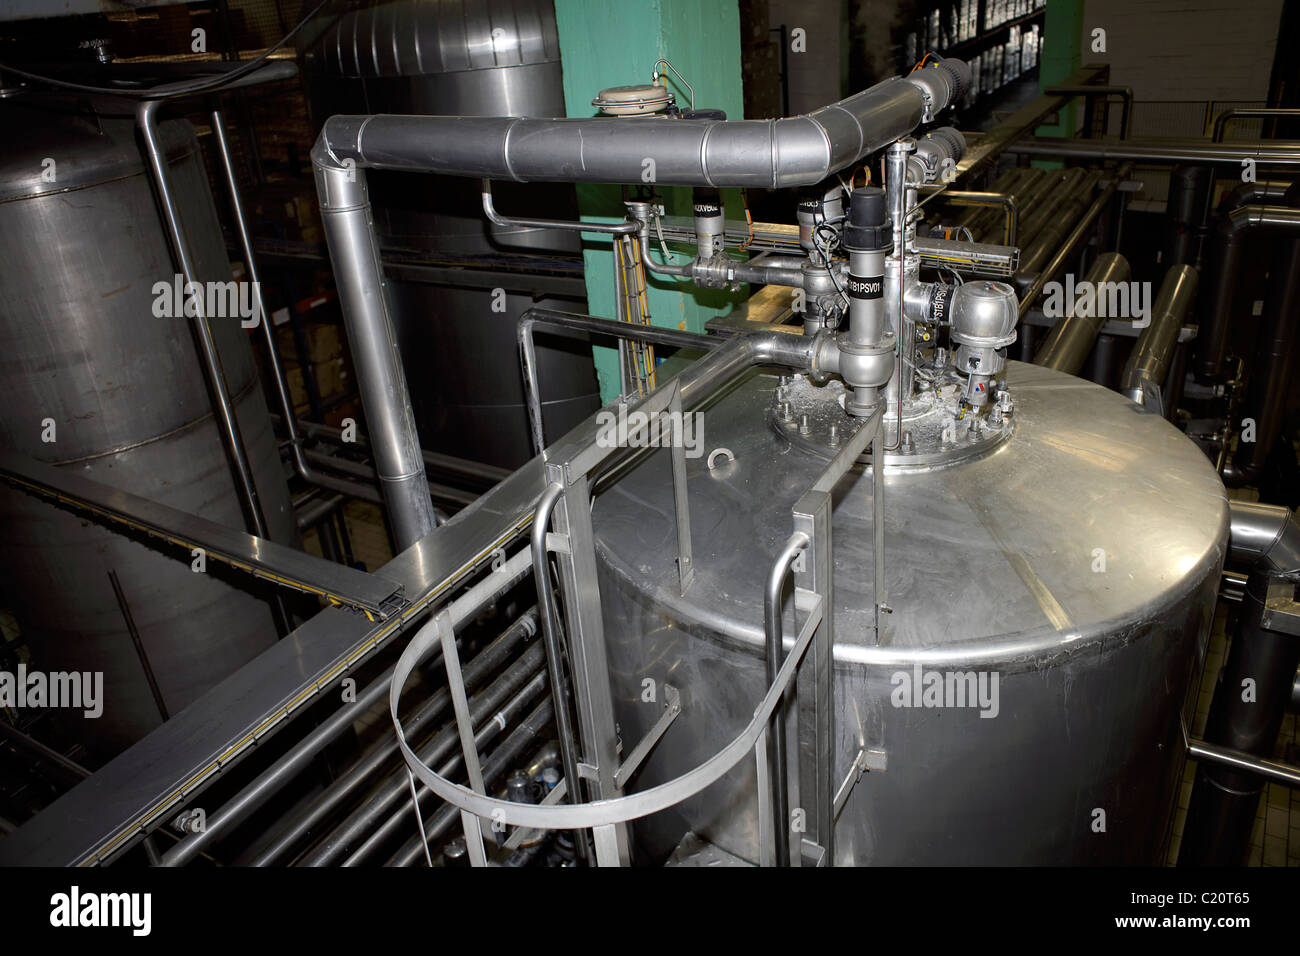 Aluminium pipes and machinery, tubes, industry, industrial, factory, generic, manufacturing, heavy industry, Stock Photo